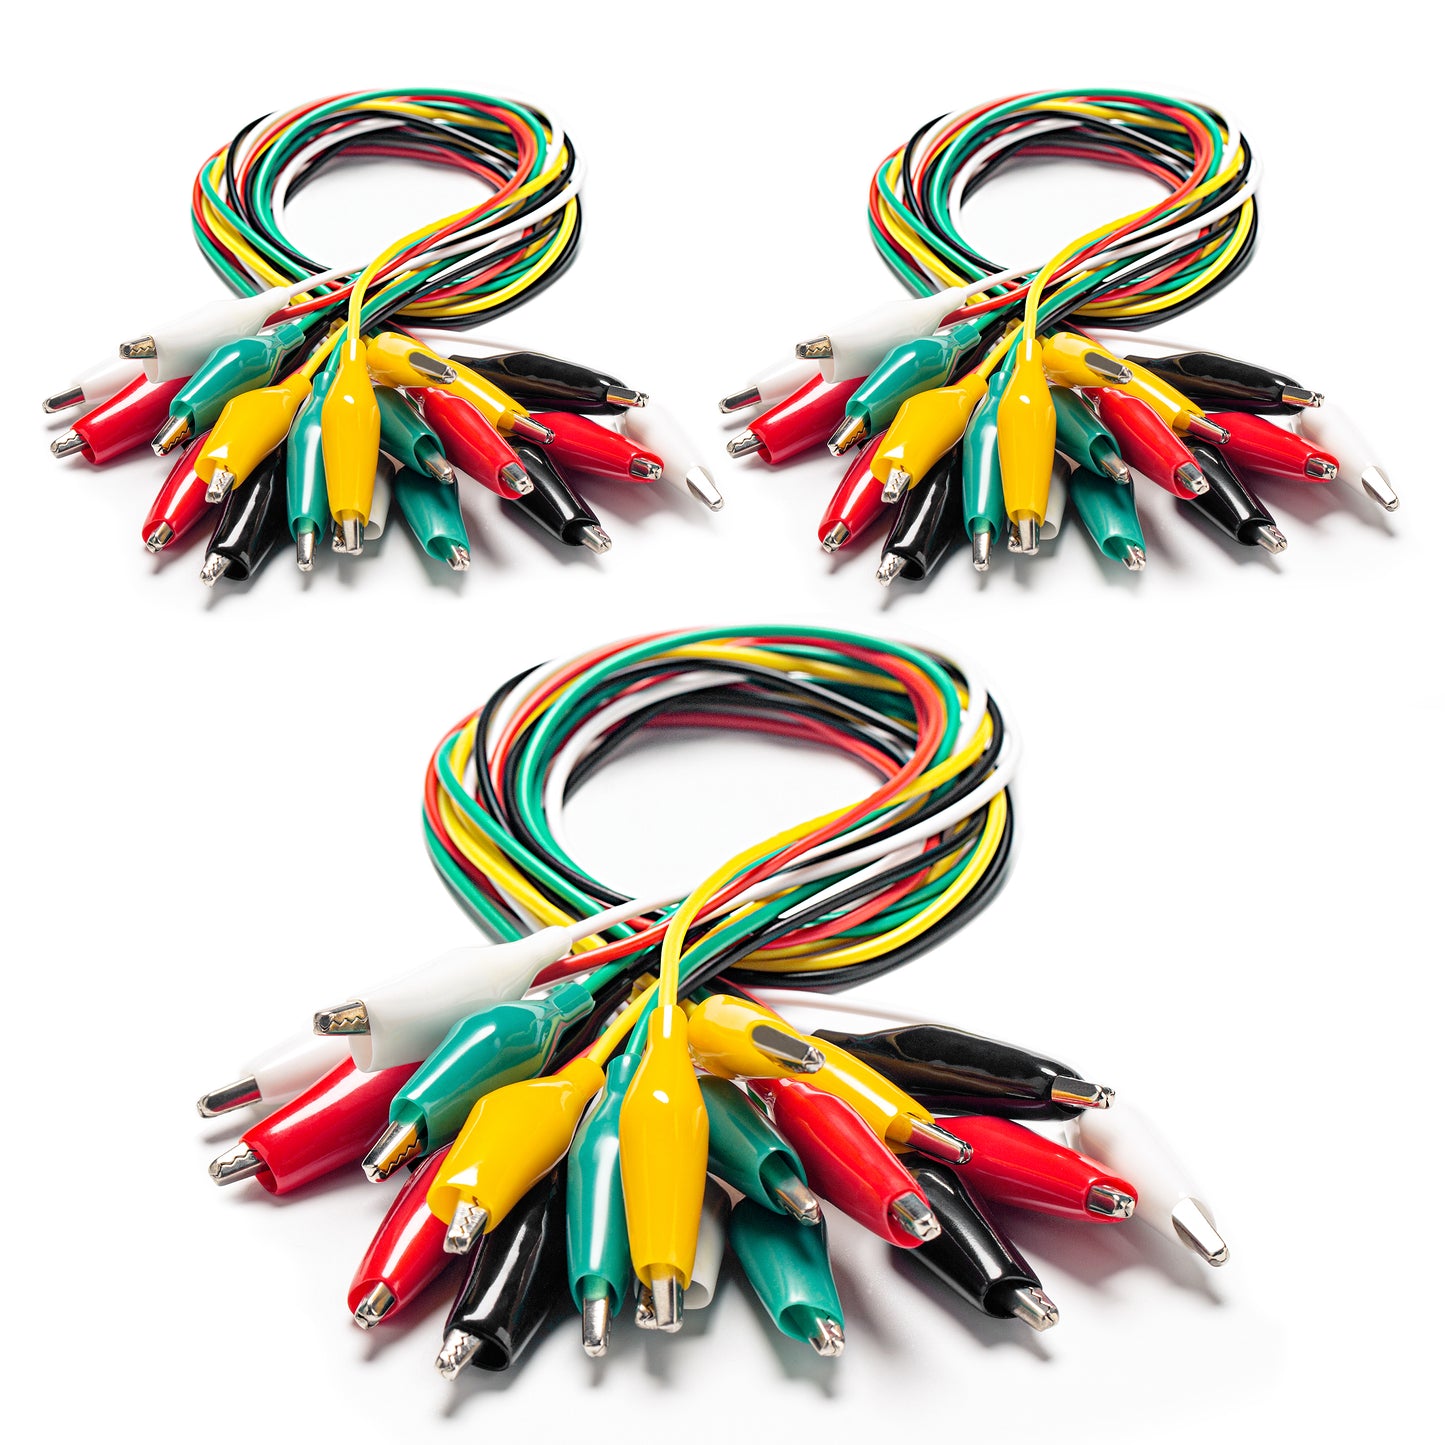 KAIWEETS KET02 DIY Electrical Alligator Clips with Wires Test Leads Sets